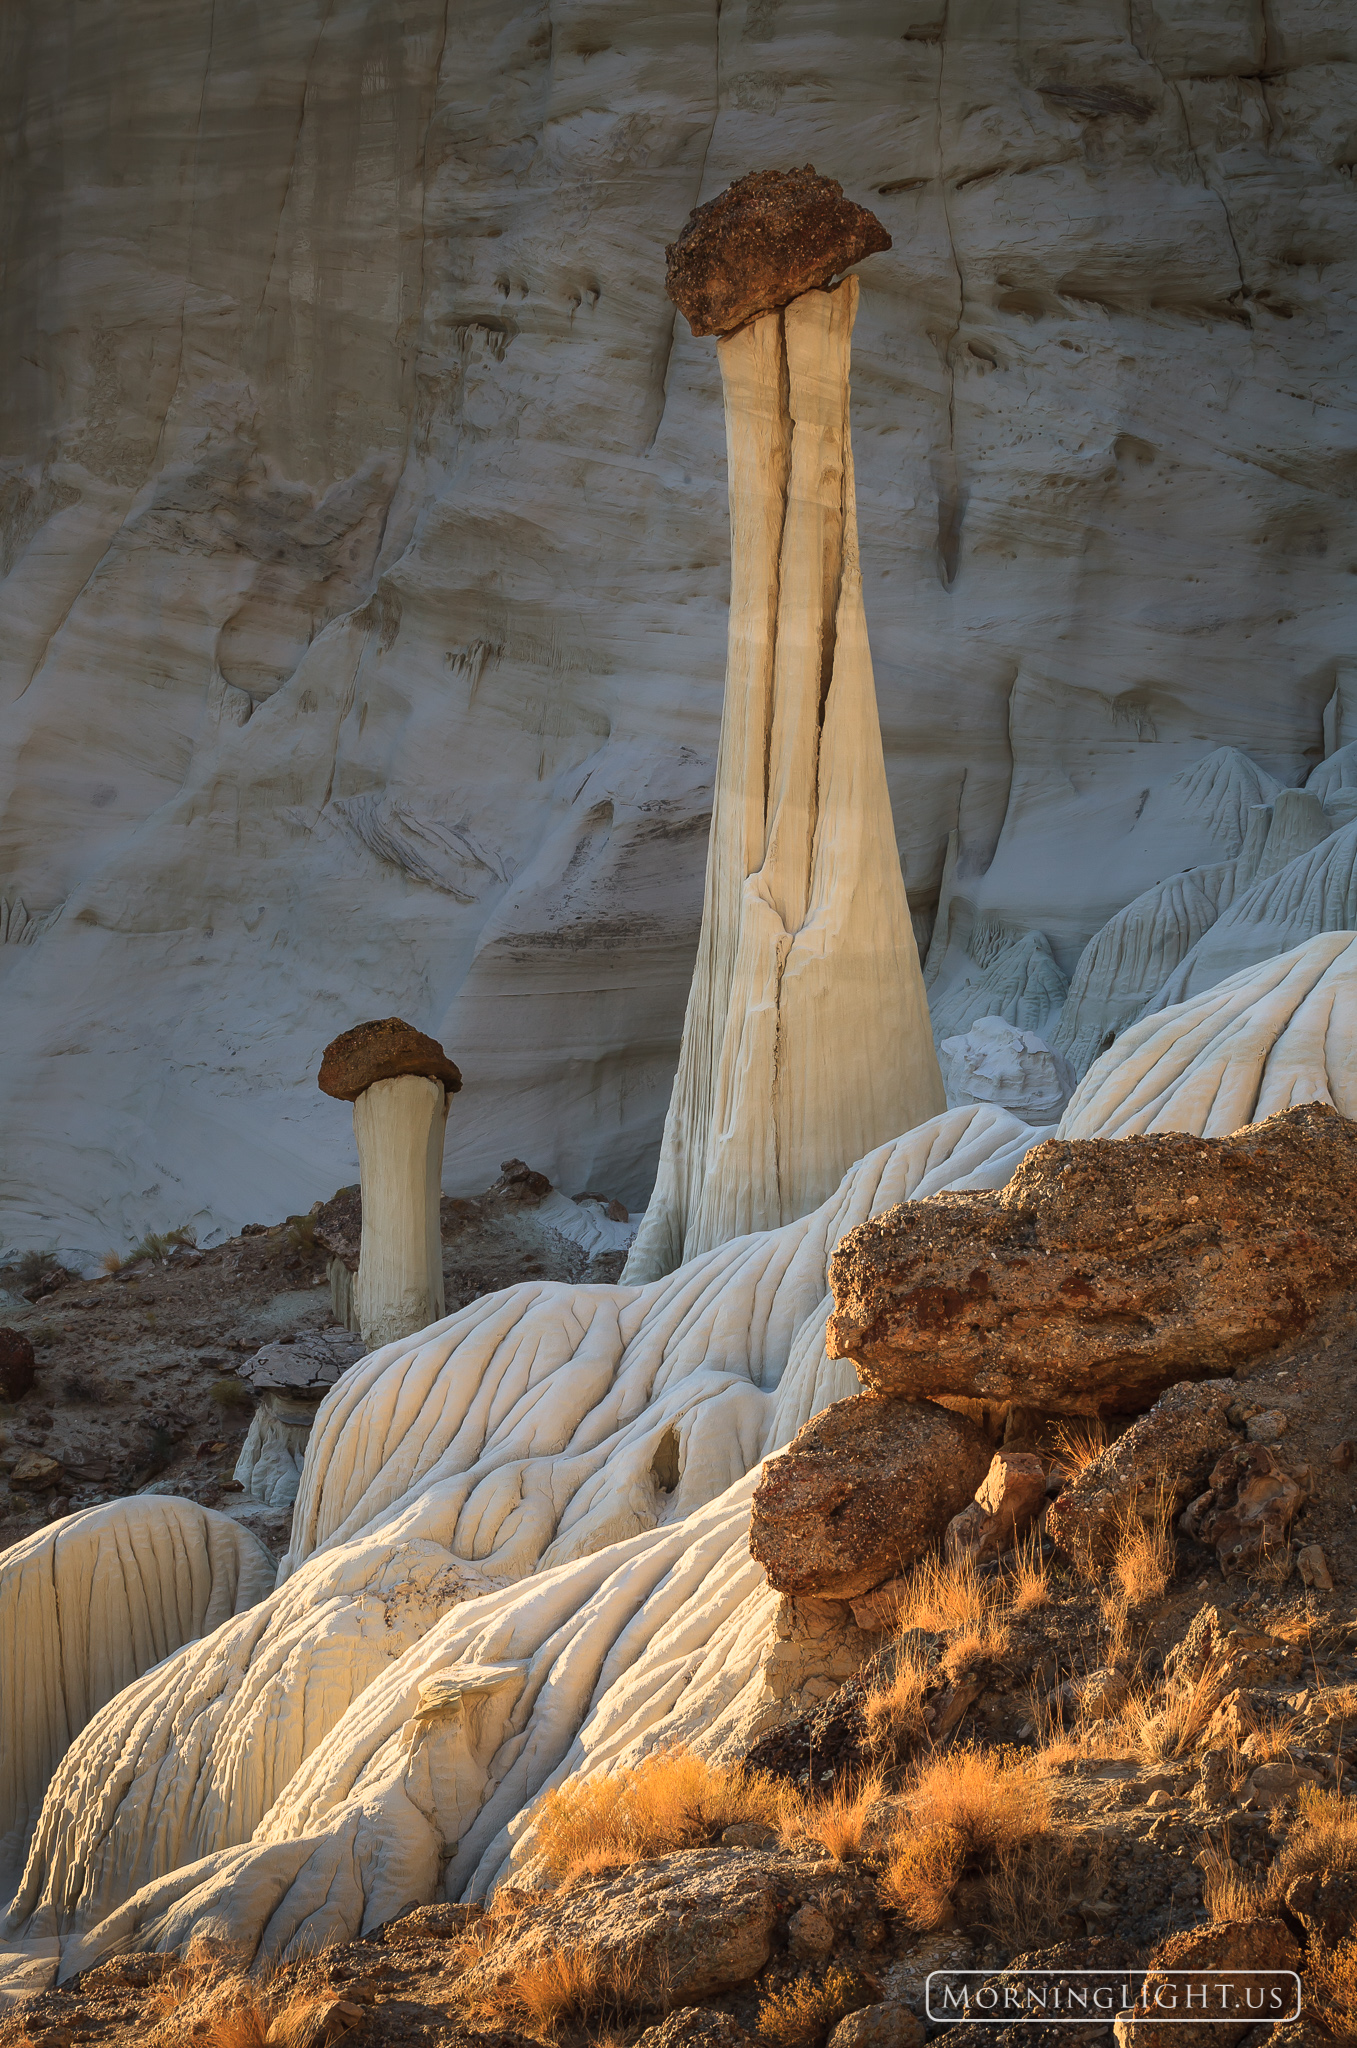 This beautiful hoodoo is located near Utah's border with Arizona but in the middle of nowhere. It took quite a bit of effort...